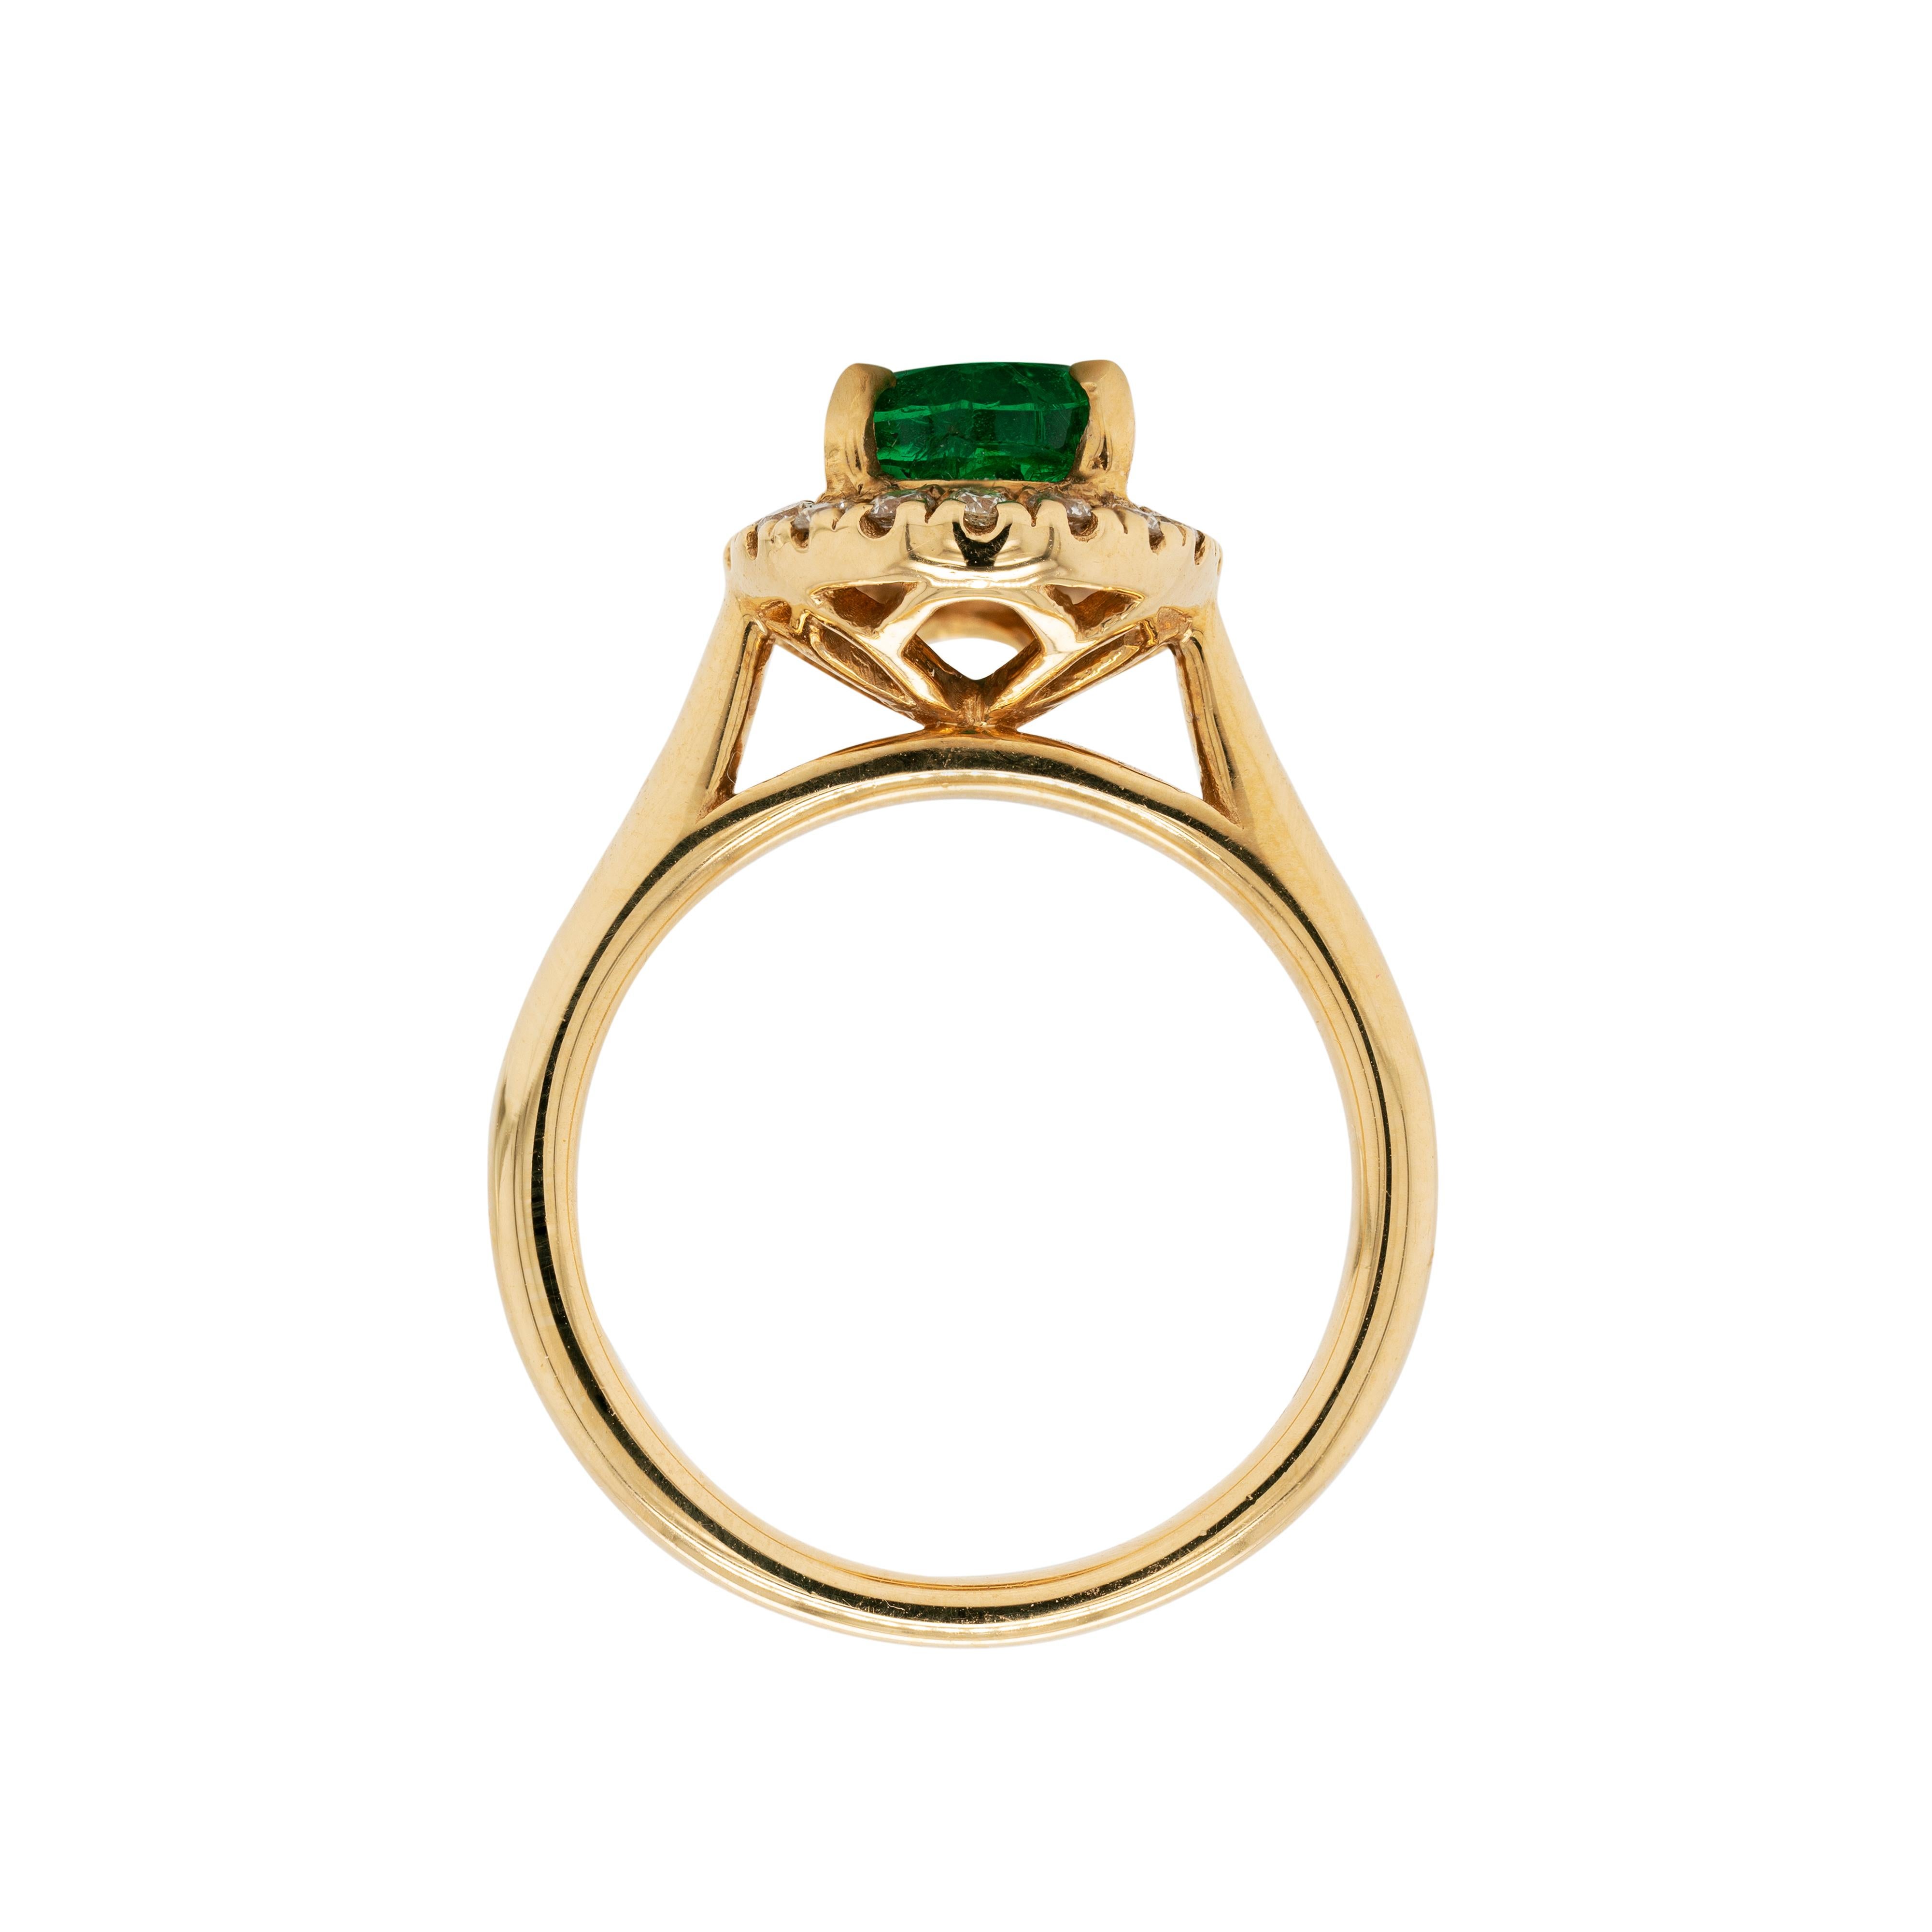 This gorgeous 18 carat yellow gold cluster engagement ring features a 1.85ct oval shaped emerald, in an open back, four claw setting. The vibrant gemstone is surrounded by an exquisite halo of eighteen claw set fine quality round brilliant cut